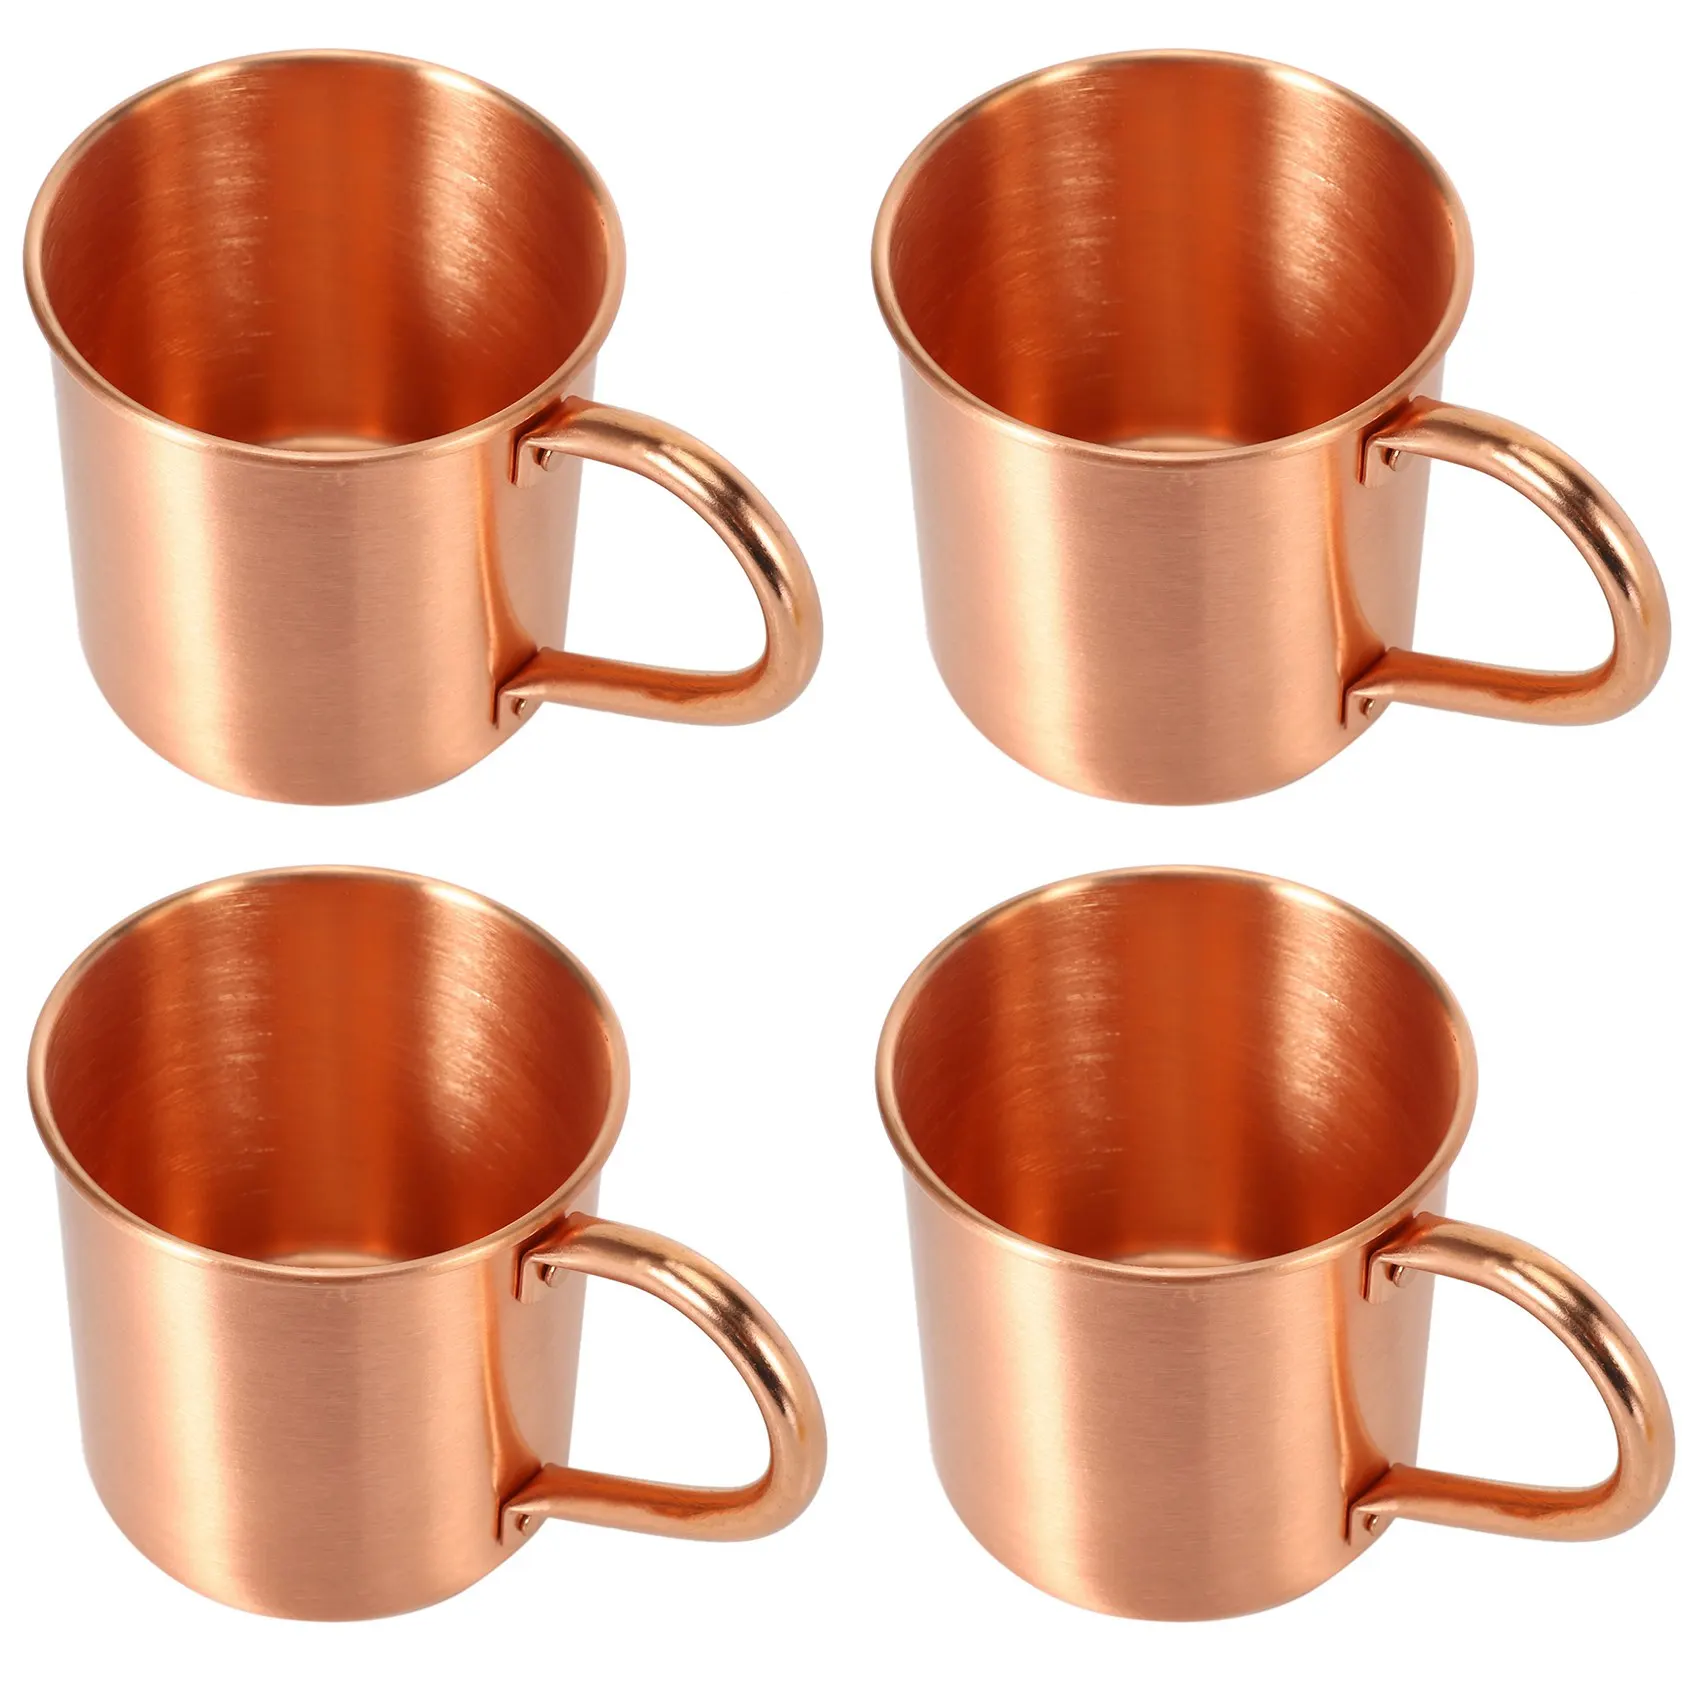 

4X Pure Copper Mug Solid Without Inside Liner for Cocktail Coffee Beer Milk Water Cup Home Drinkware